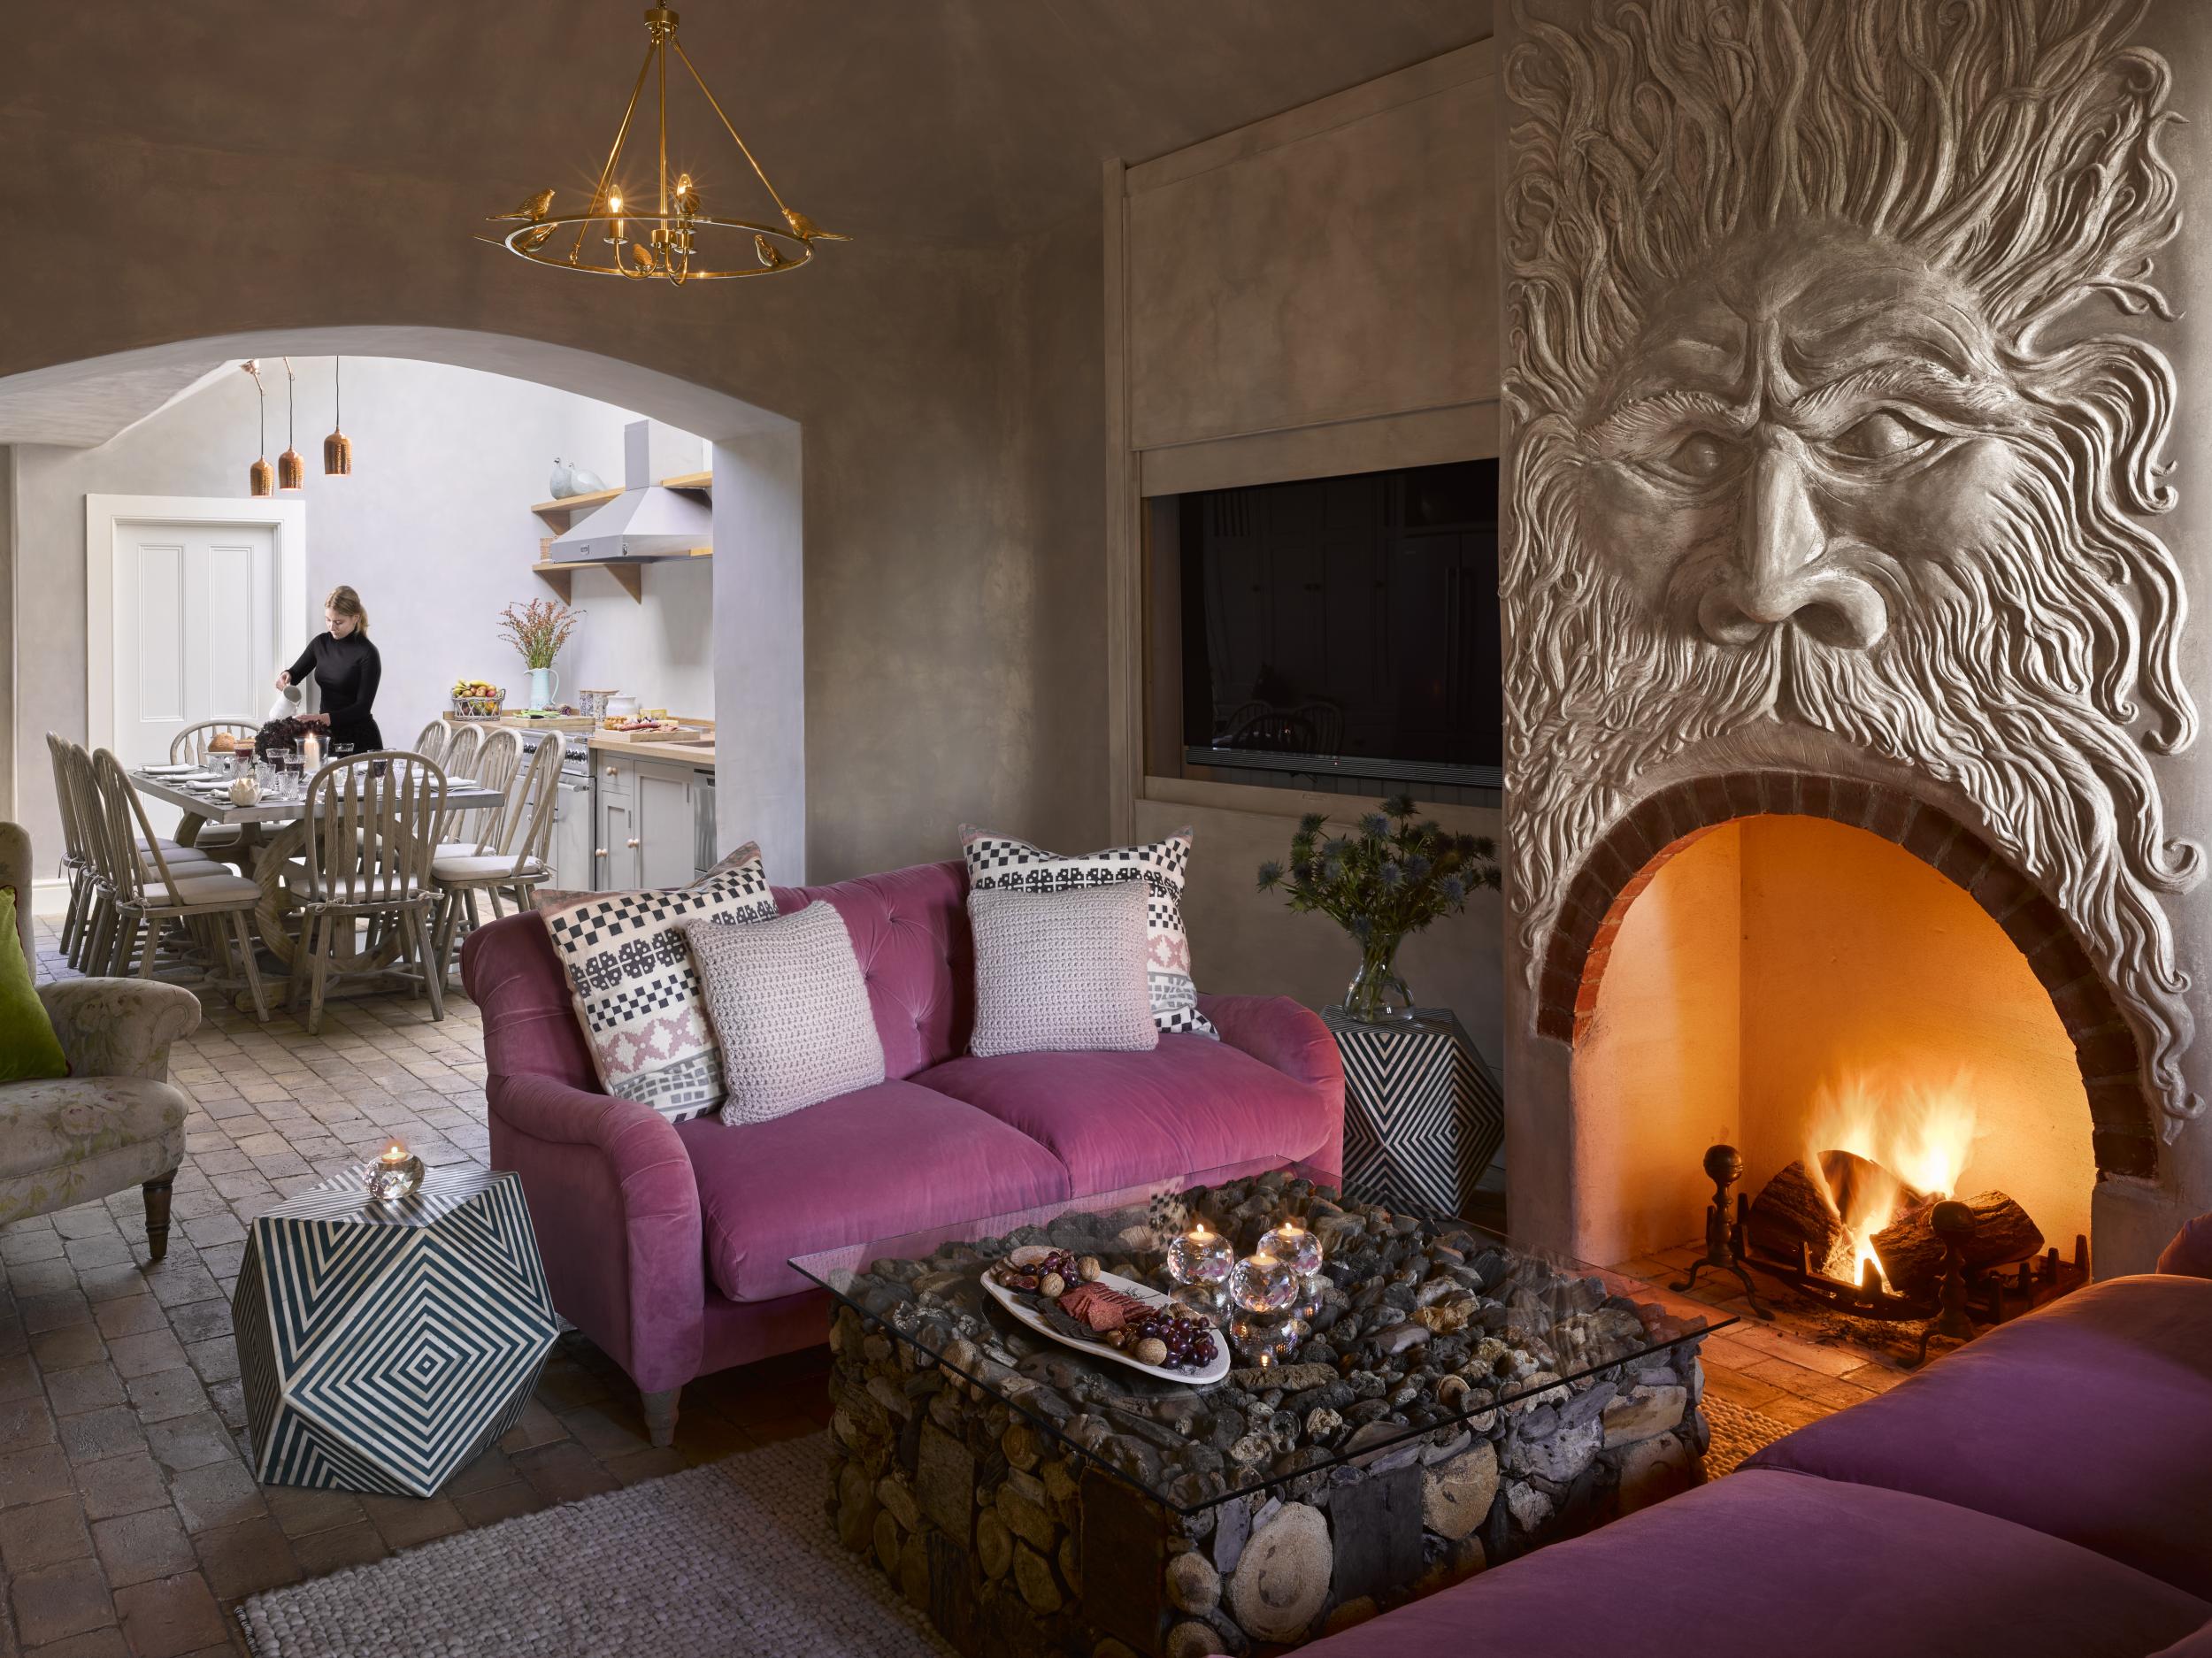 Curl up next to a roaring fire